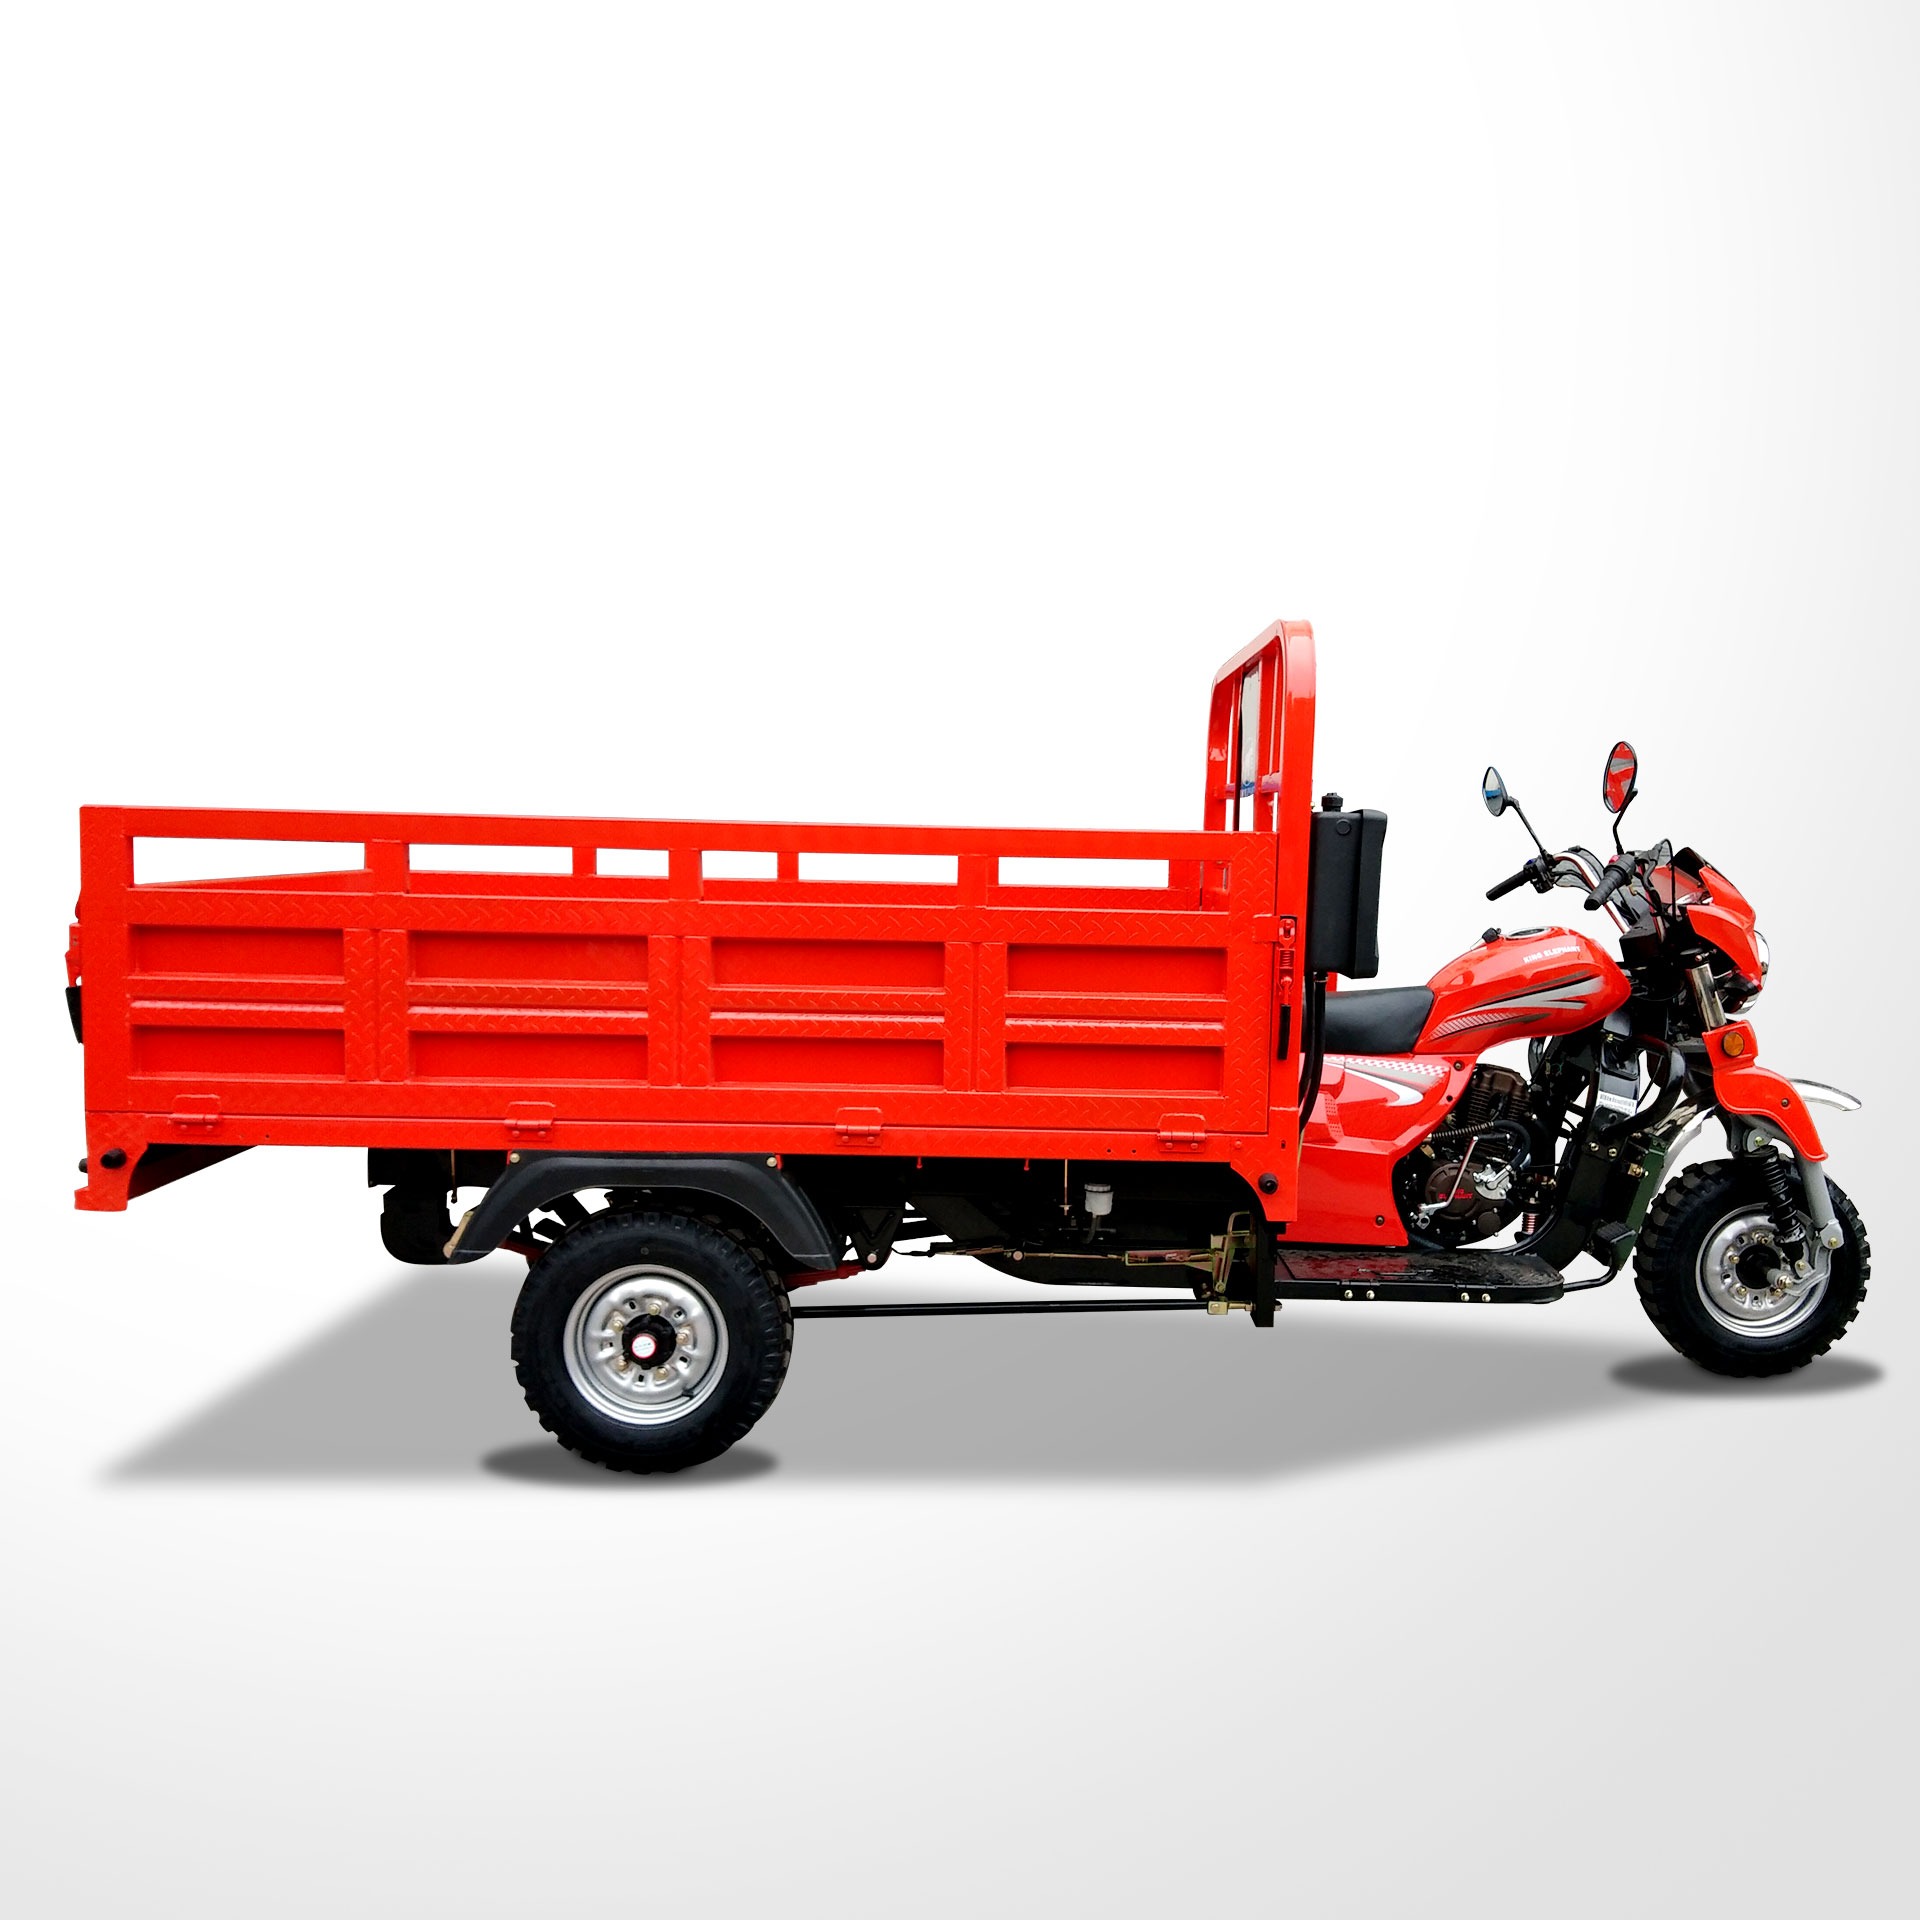 2021 DAYANG motorized tricycle 3 wheels dumper truck 1 ton carrying cargo motorcycle Safe durable Automatic